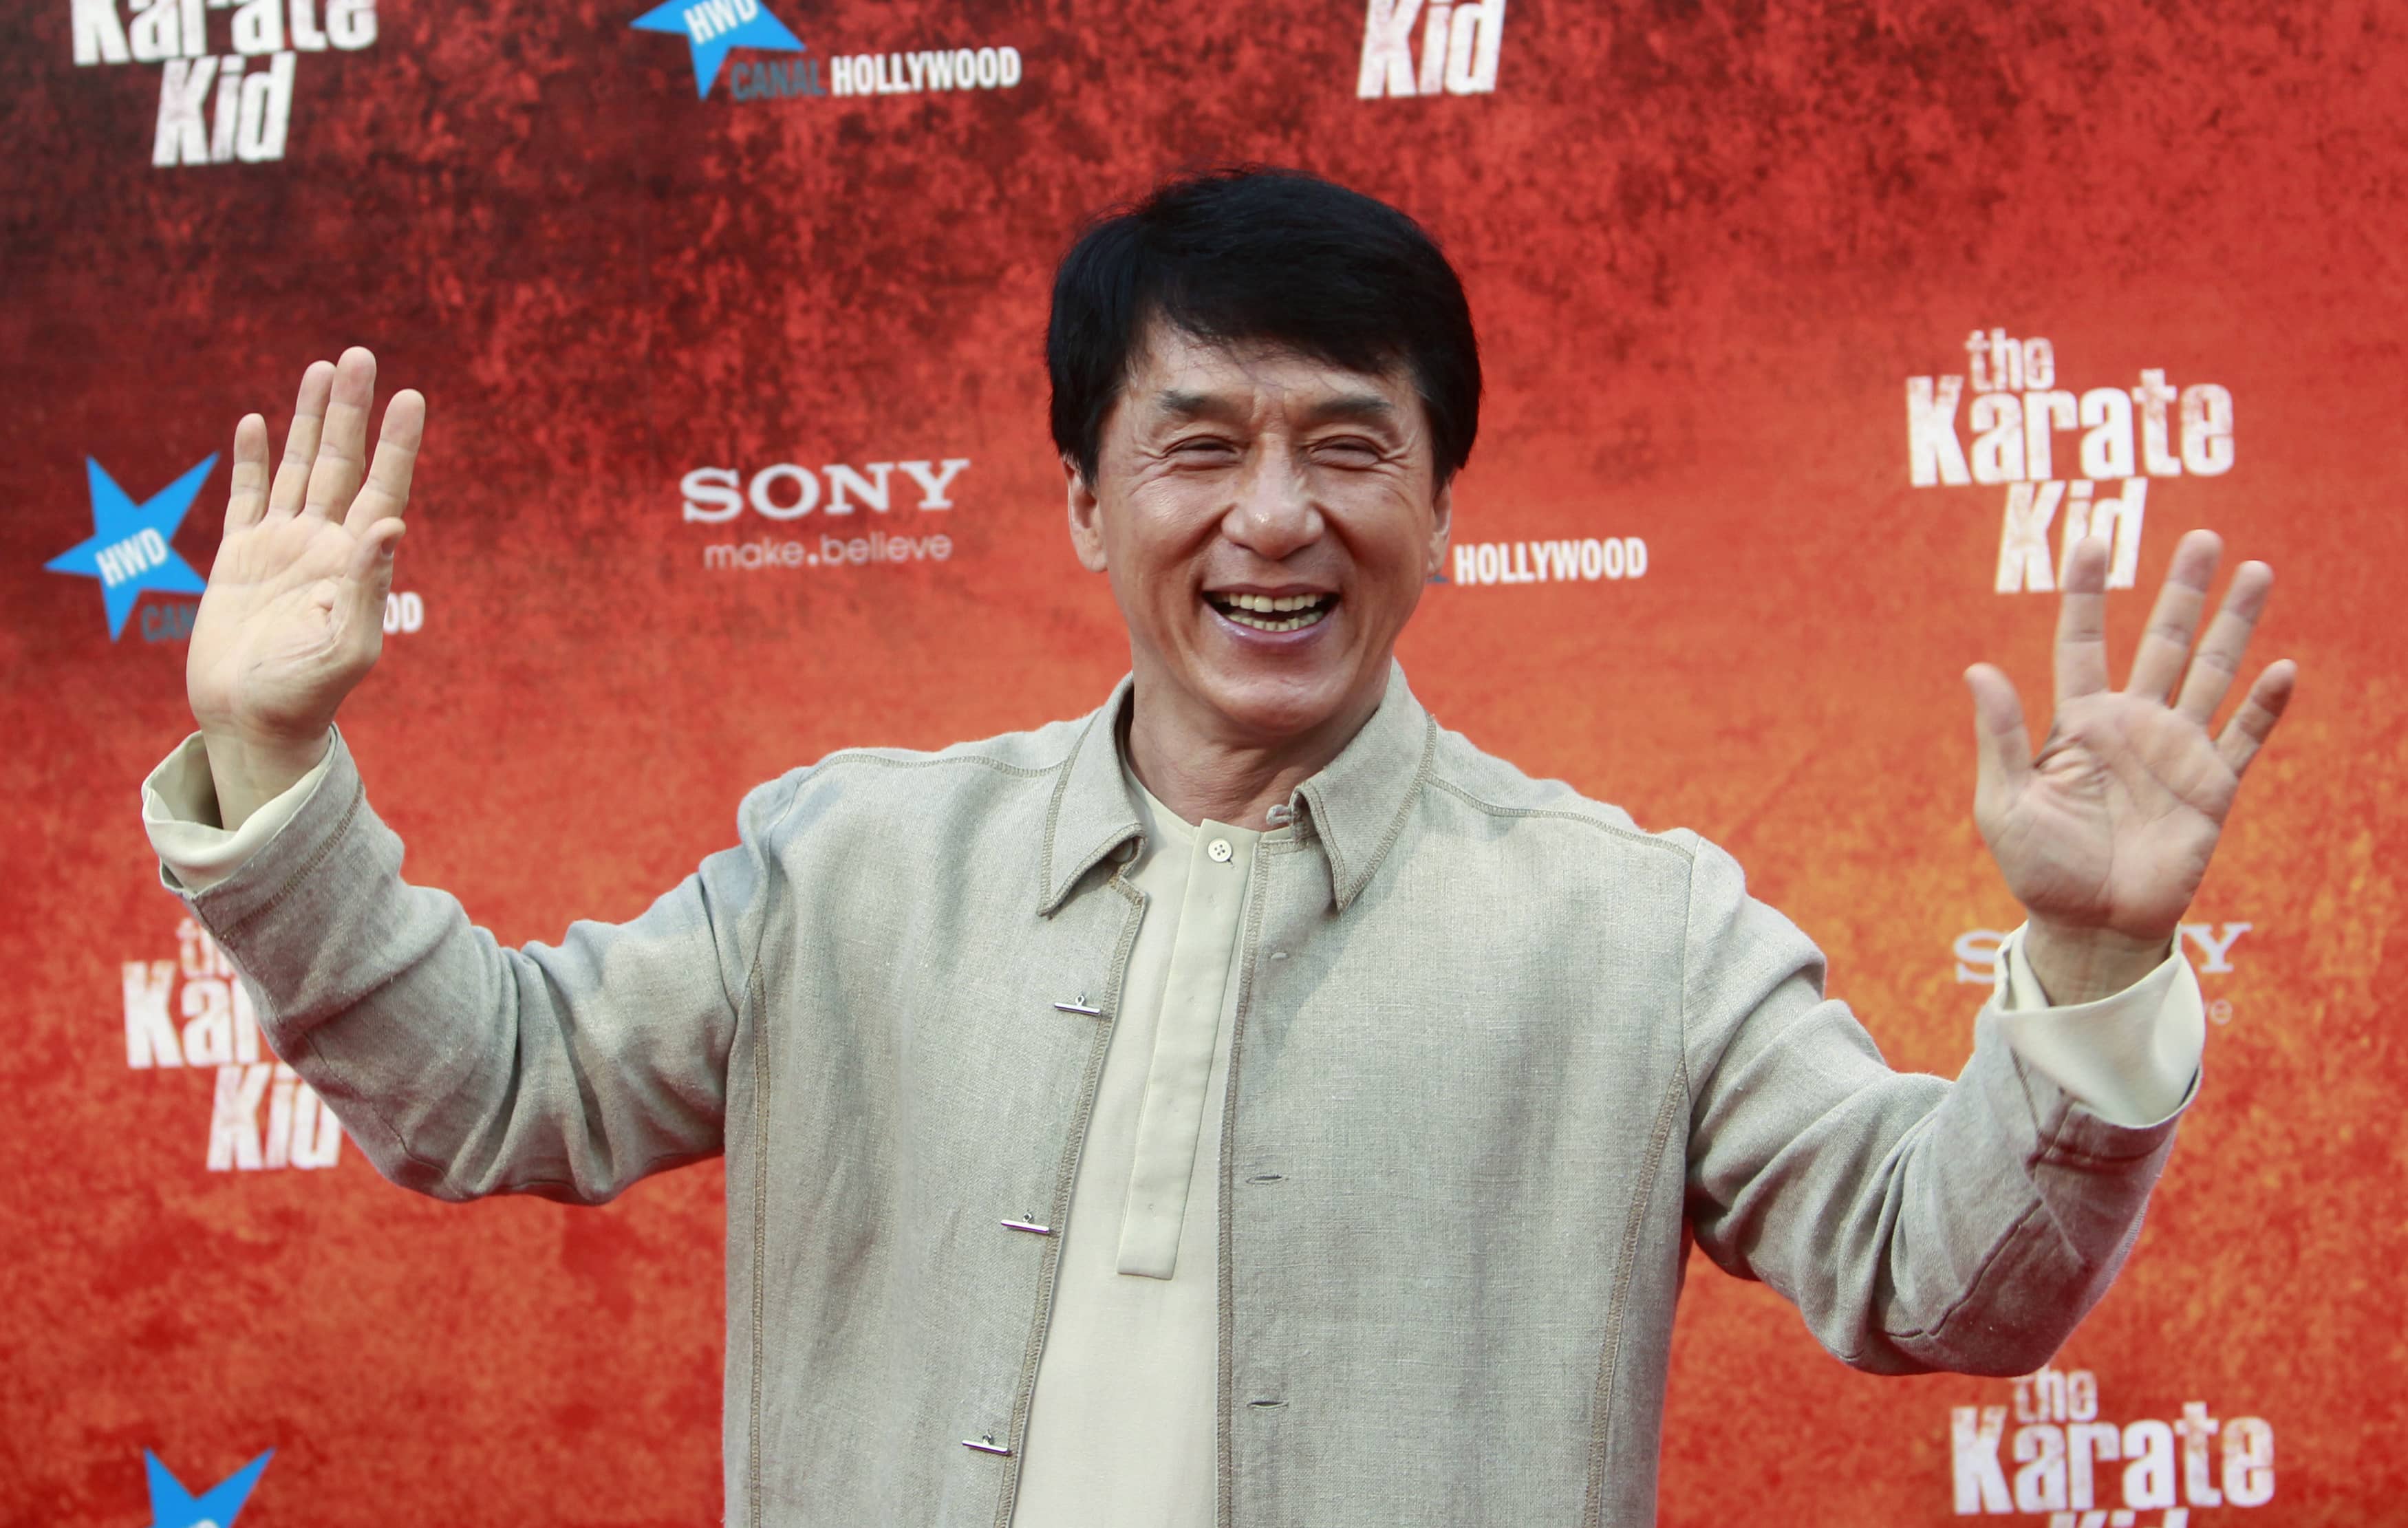 chinese-actor-chan-poses-for-photographers-as-he-arrives-for-the-premiere-of-the-karate-kid-in-madrid